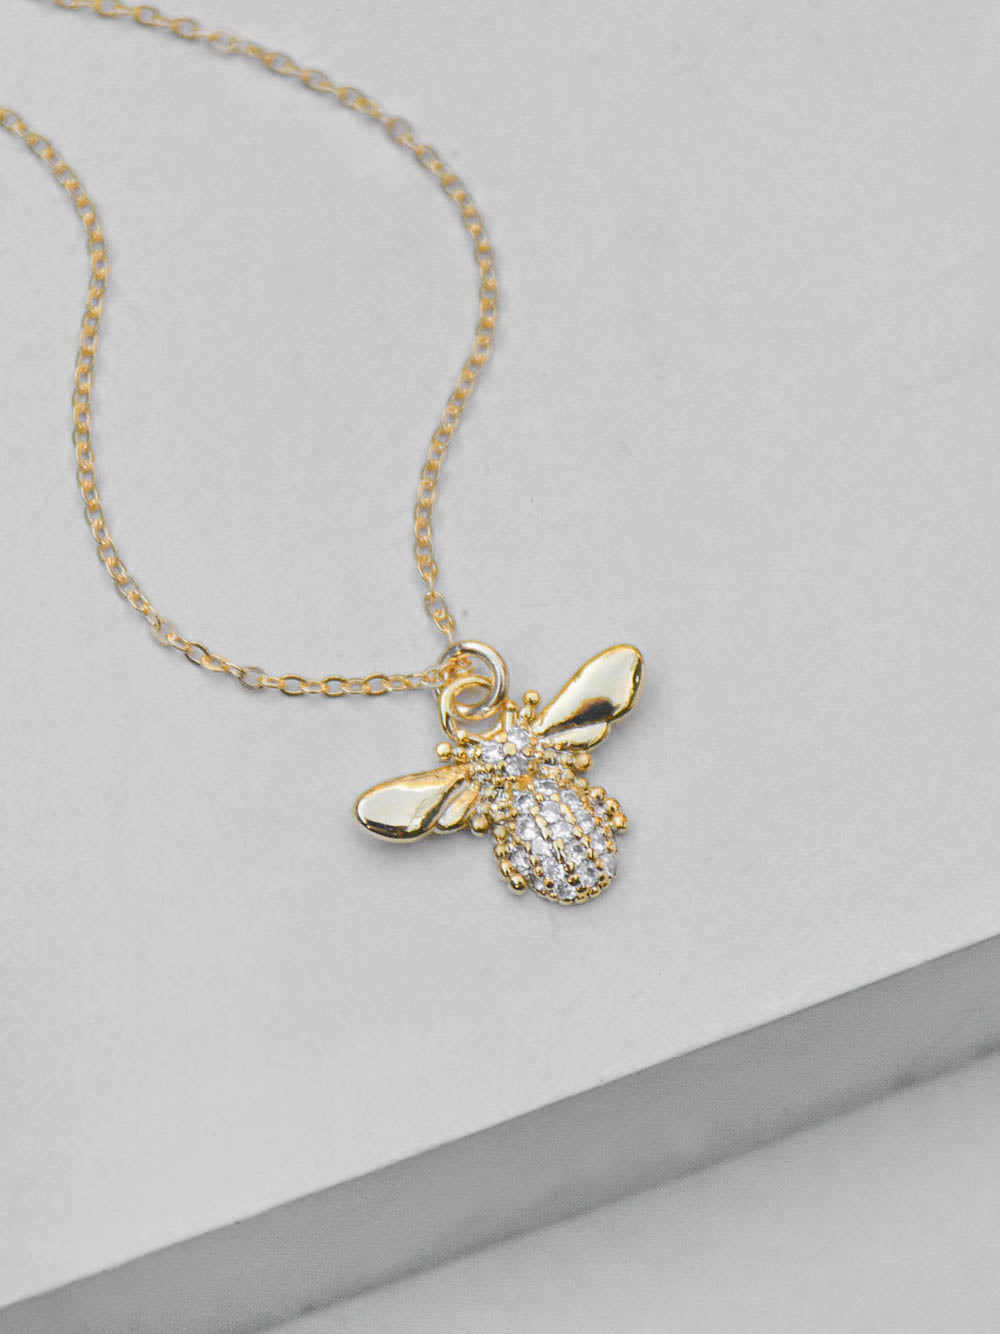 Gold CZ Bumblebee Necklace by The Faint Hearted Jewelry